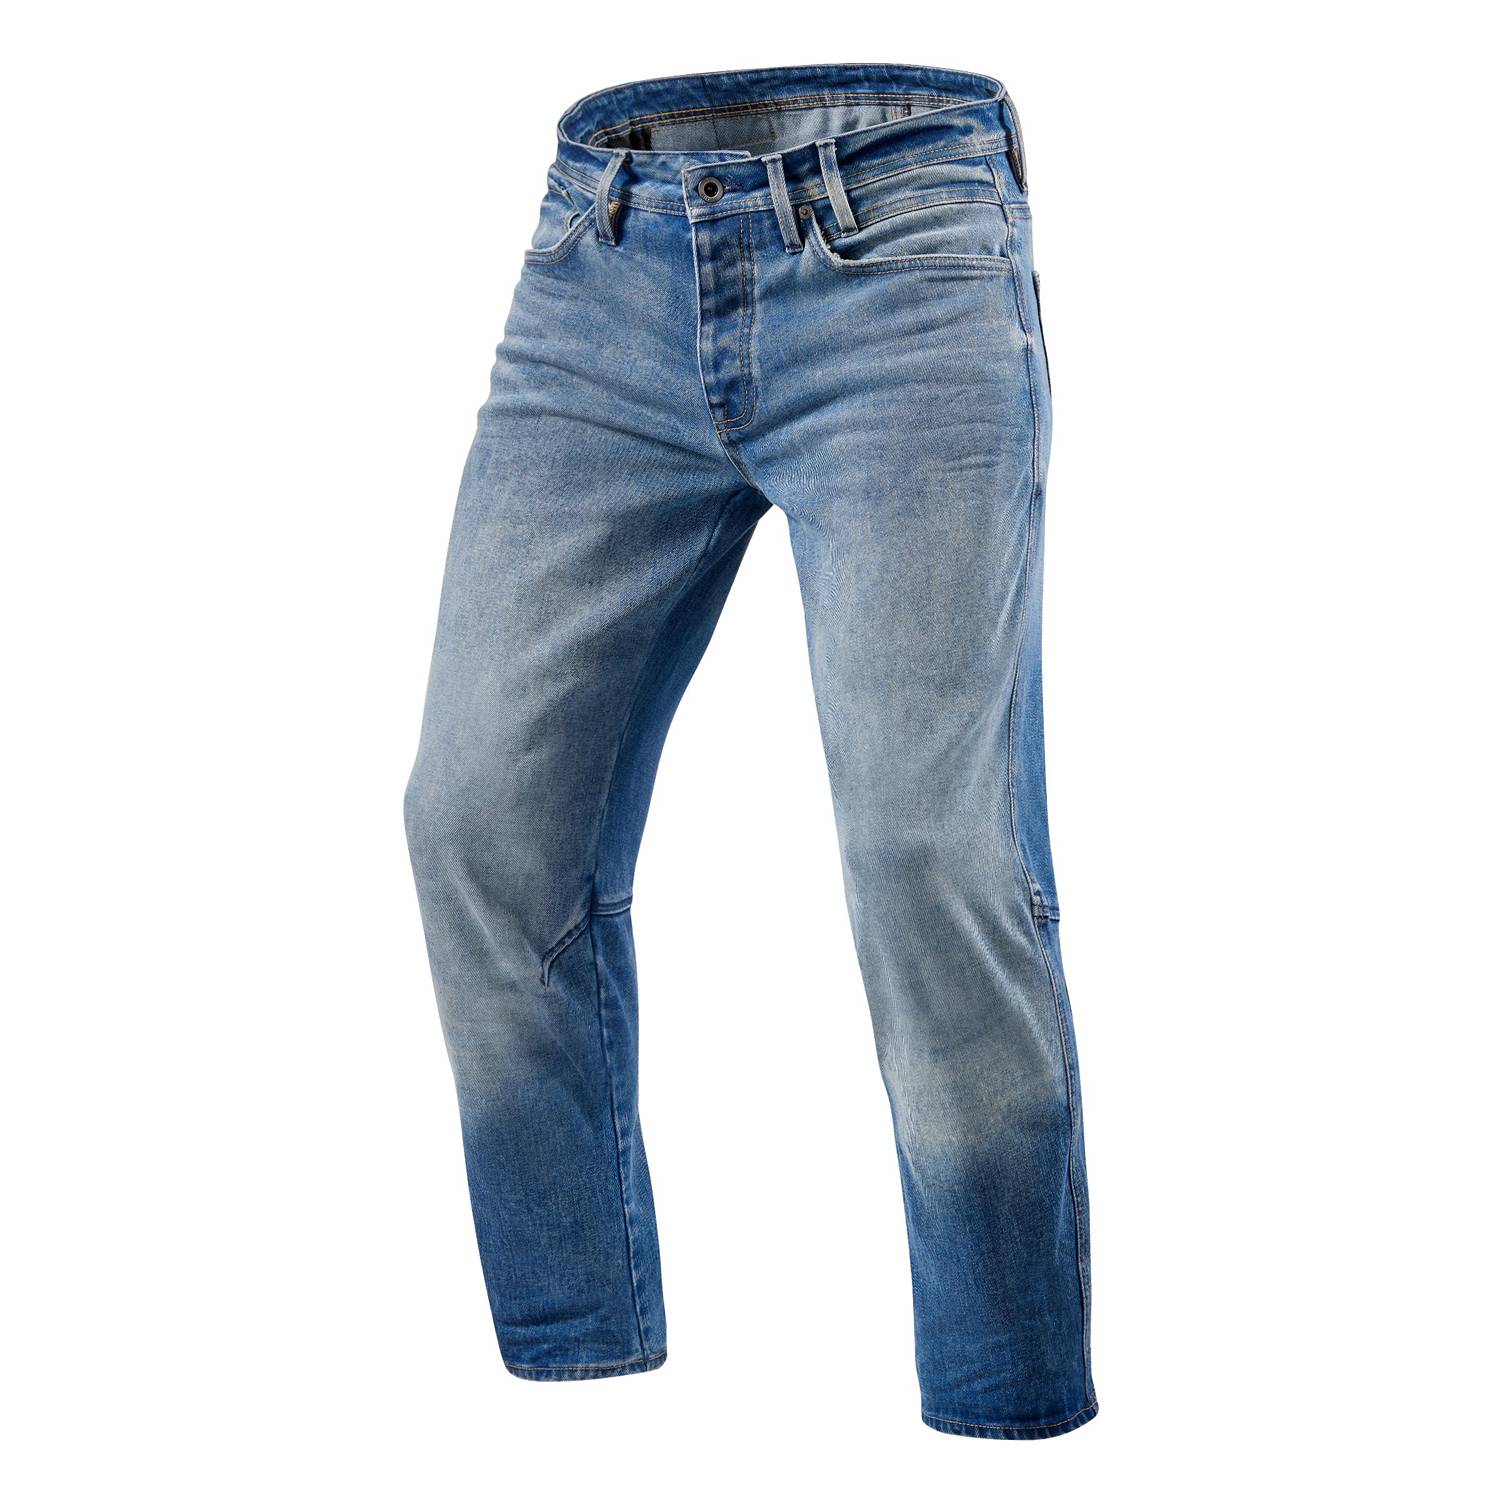 Image of REV'IT! Salt TF Mid Blue Used Motorcycle Jeans Size L34/W28 ID 8700001339025